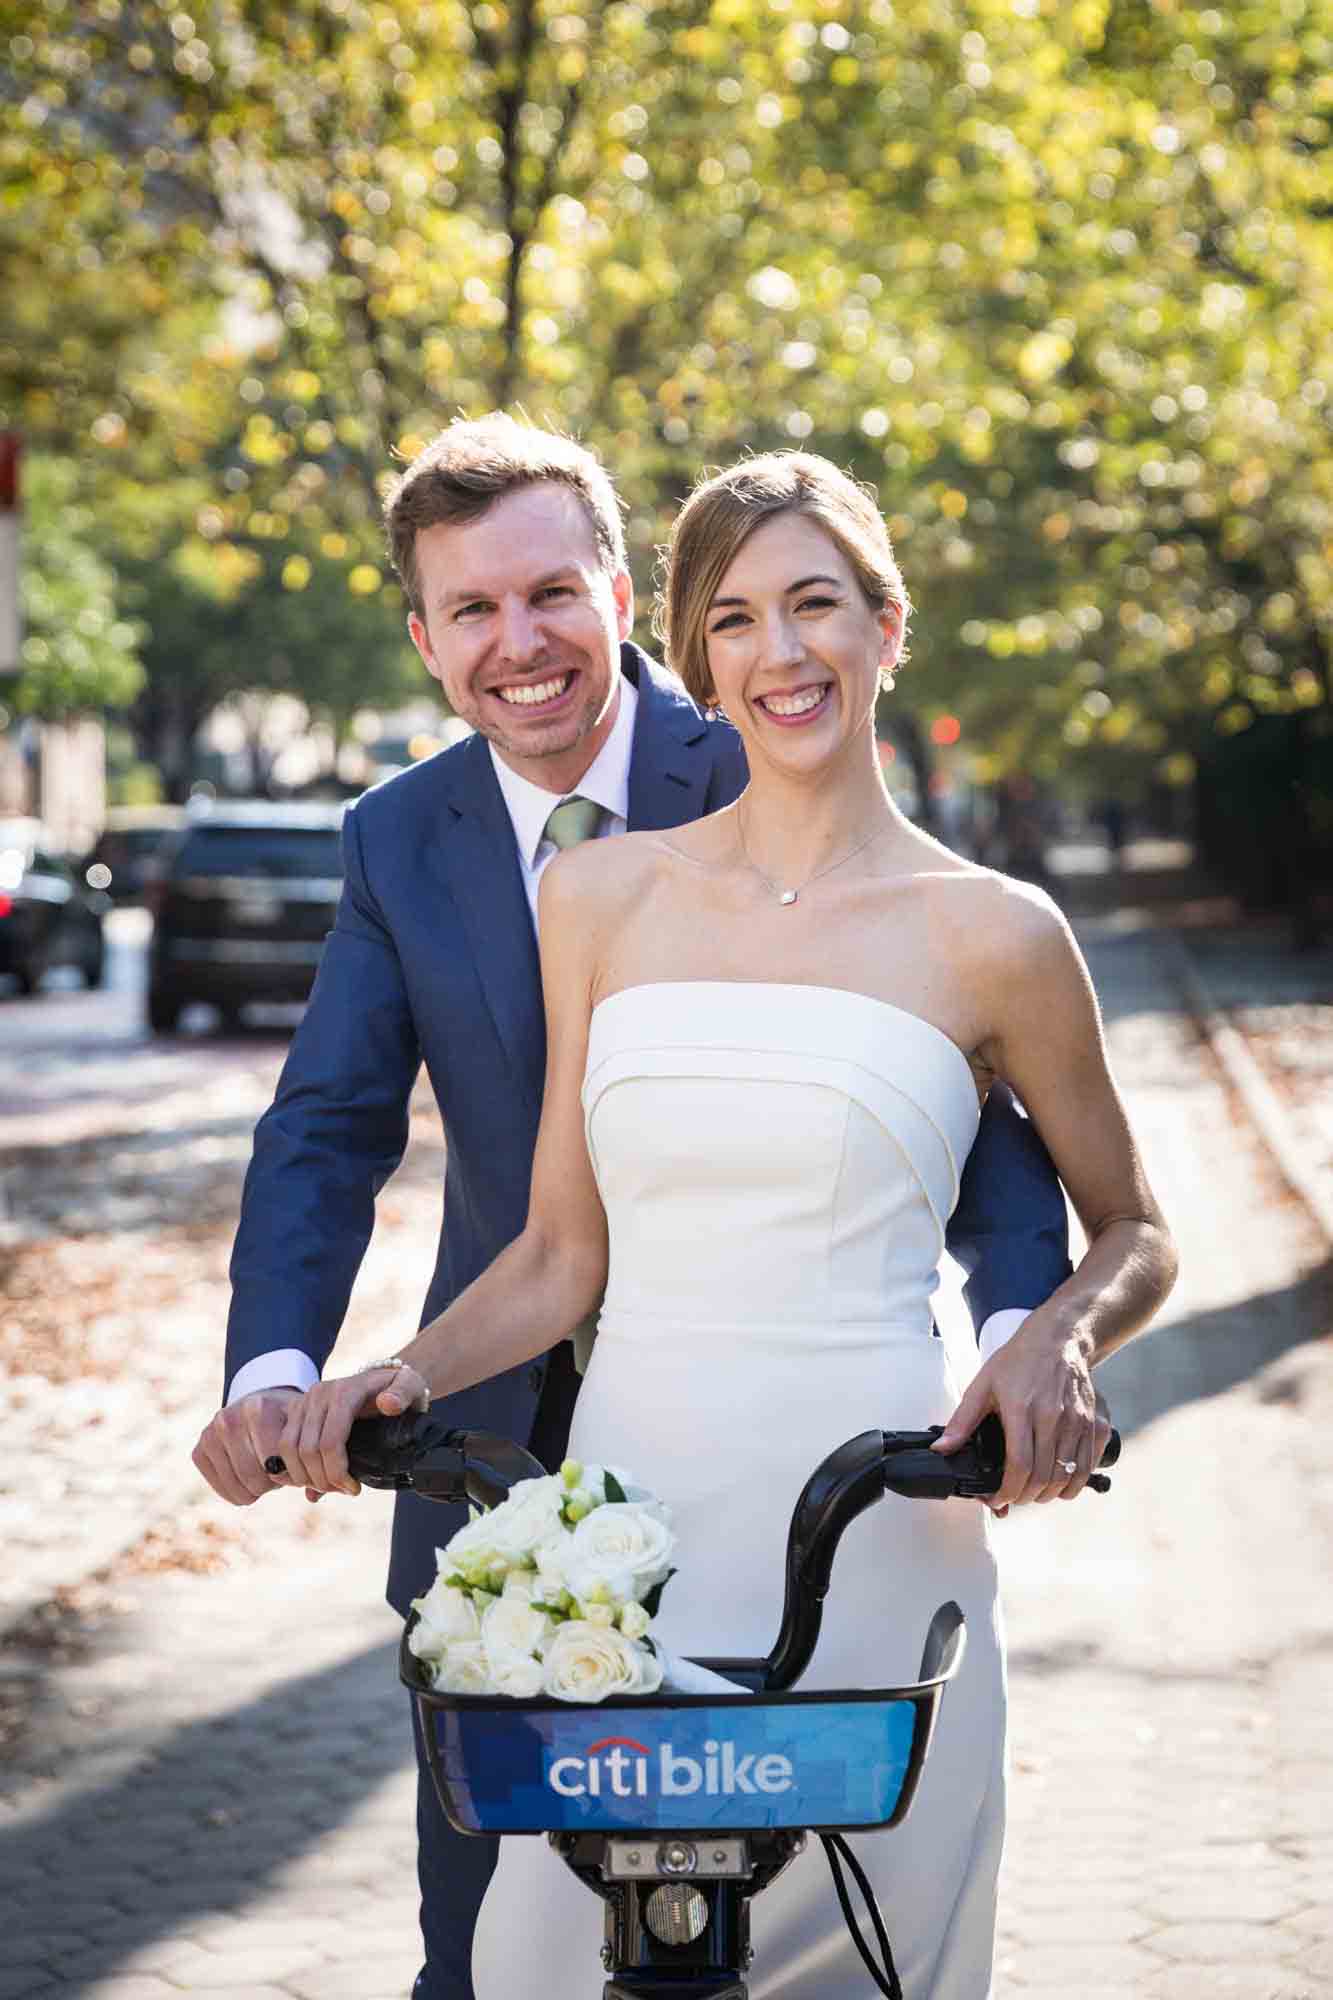 Conservatory Garden wedding photos of bride and groom on back of Citi Bike